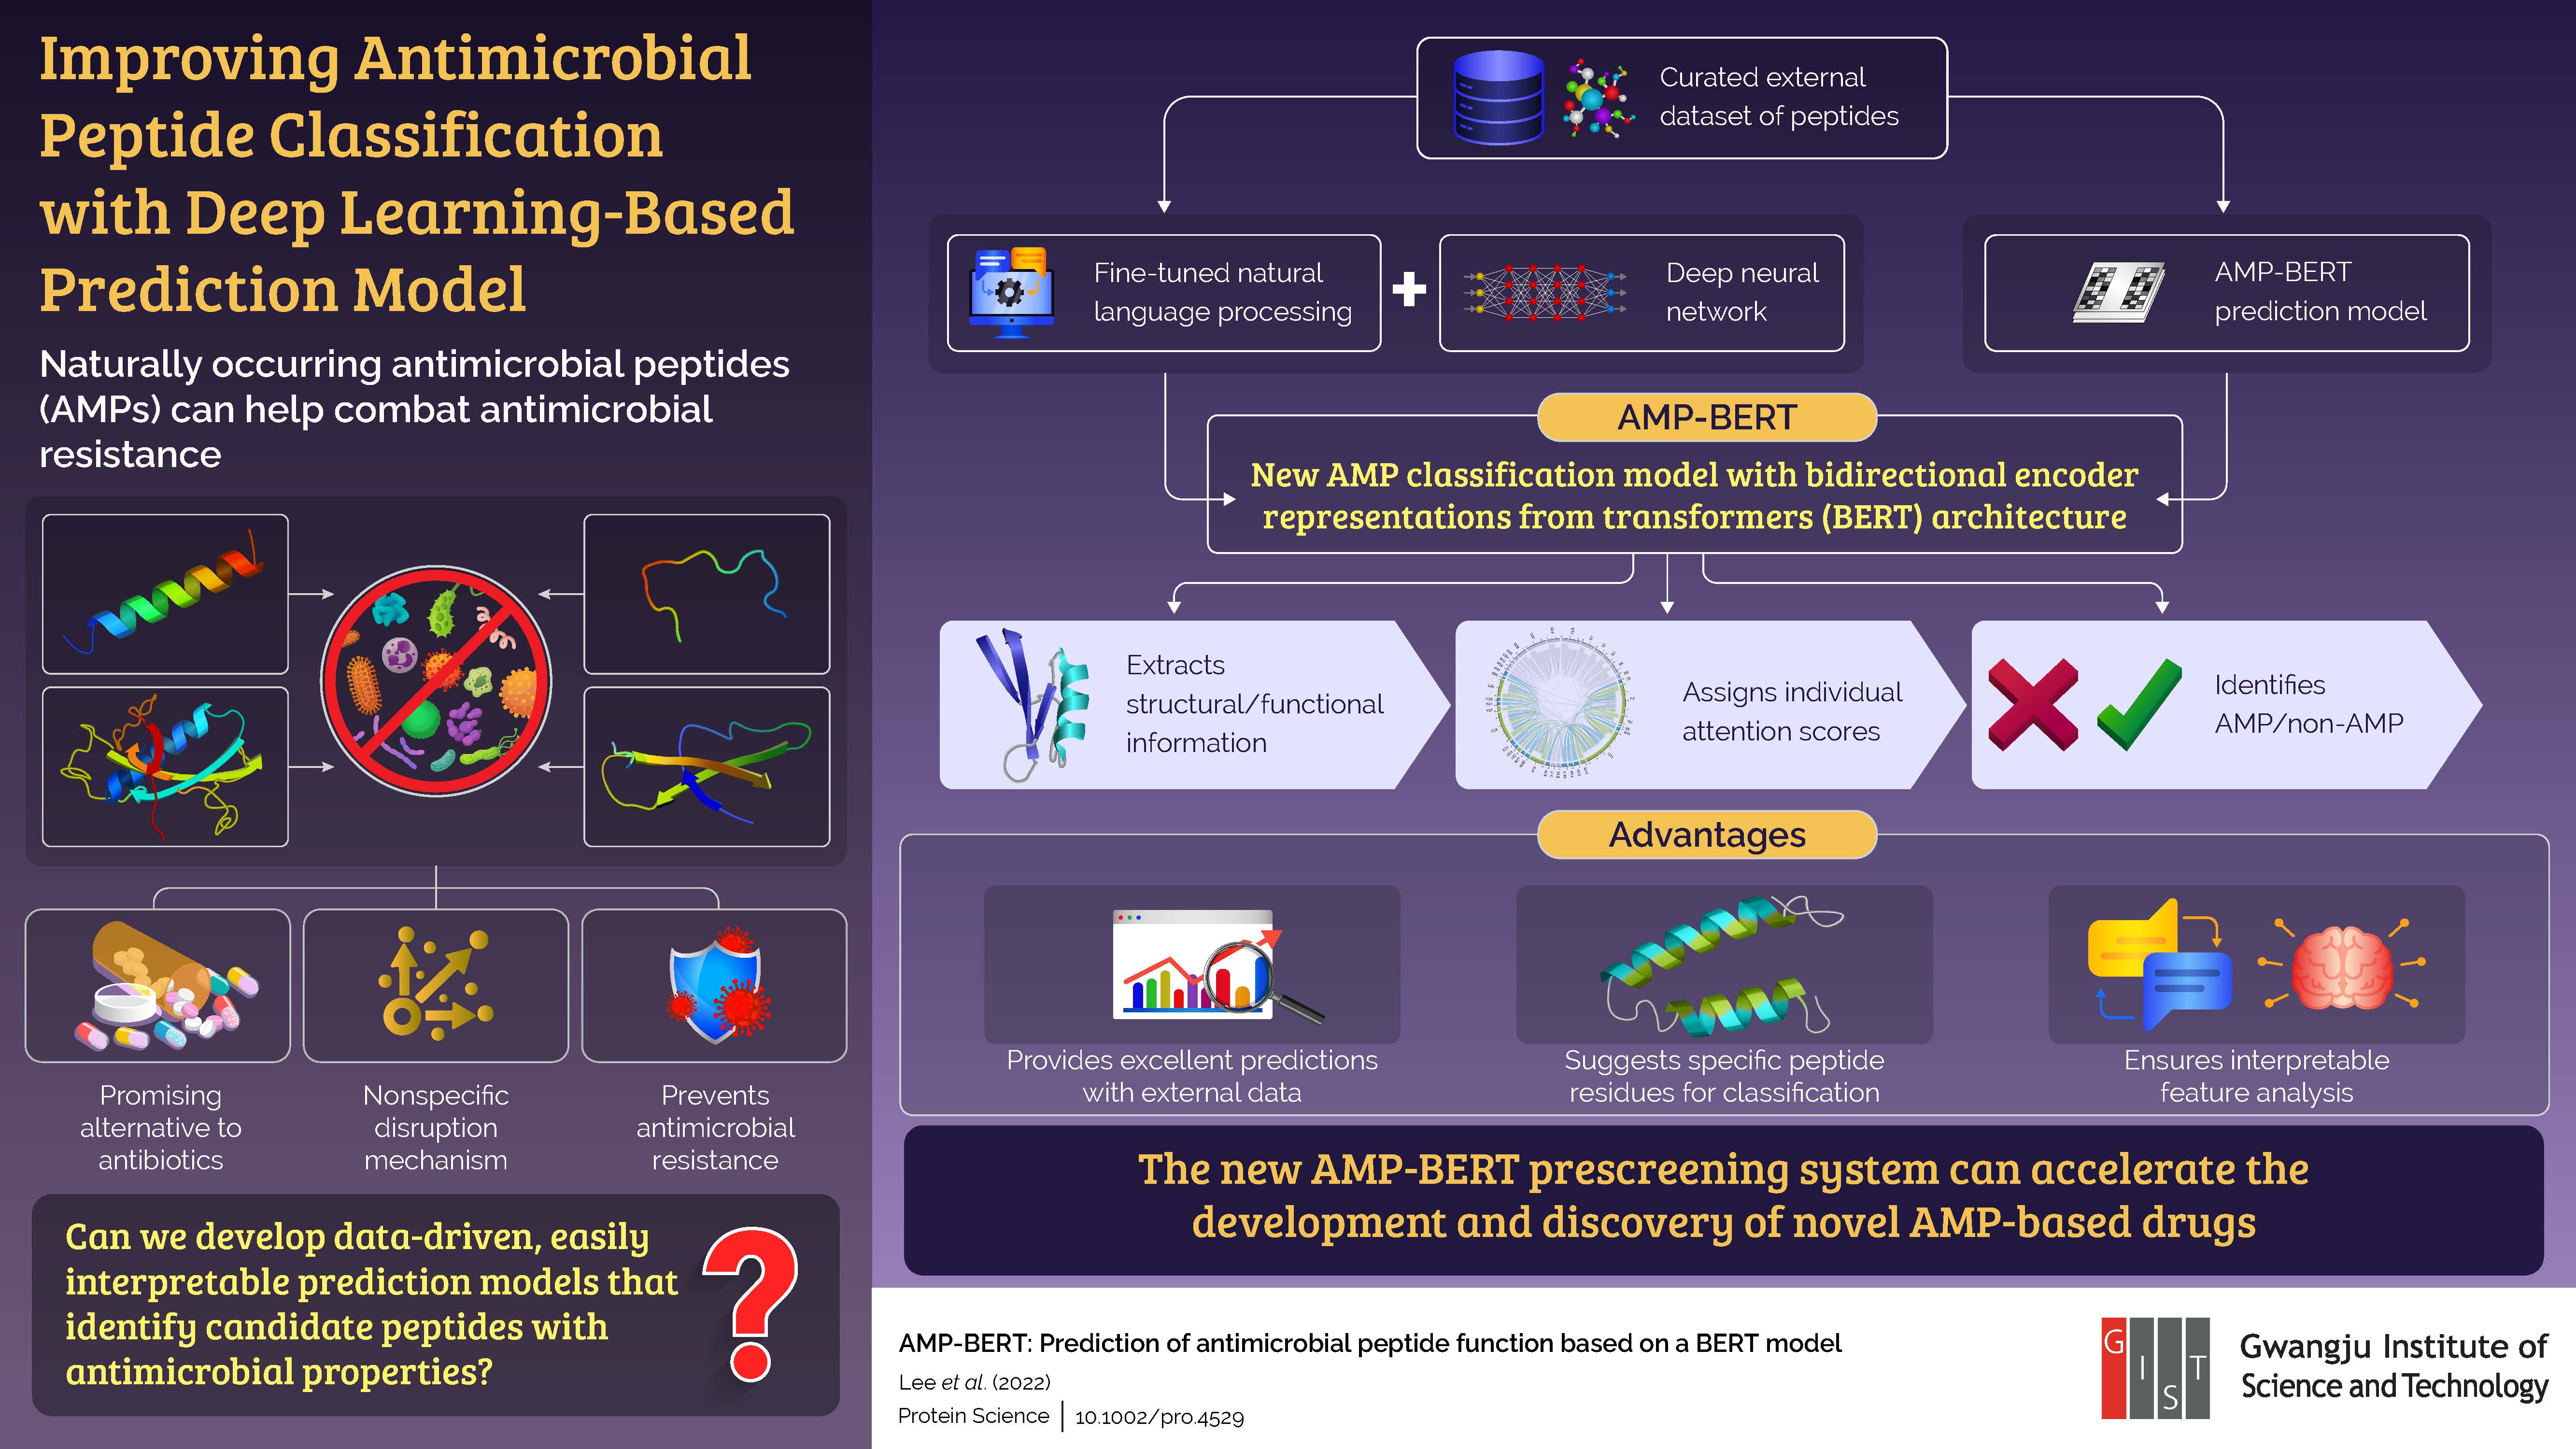 GIST Researchers Develop “AMP-BERT”: A New AI-based “Finder” of Antimicrobial Peptides 이미지